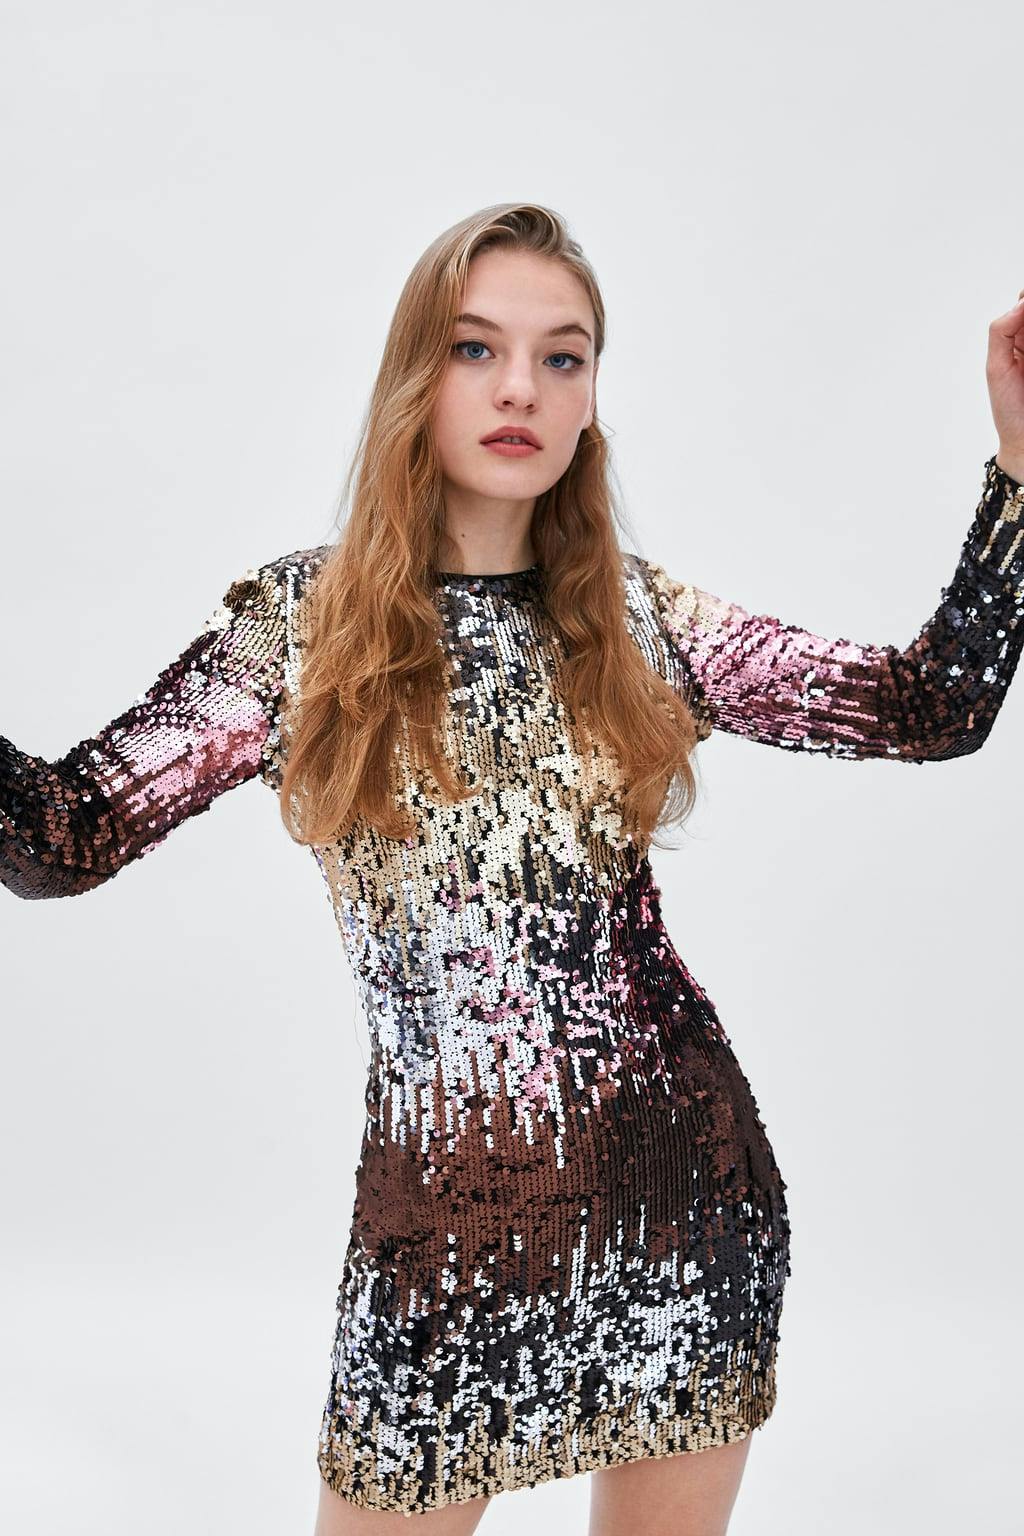 Fashion fans rushing to buy new 'star girl' dress from Zara - and it costs  just €19.99 | The Irish Sun